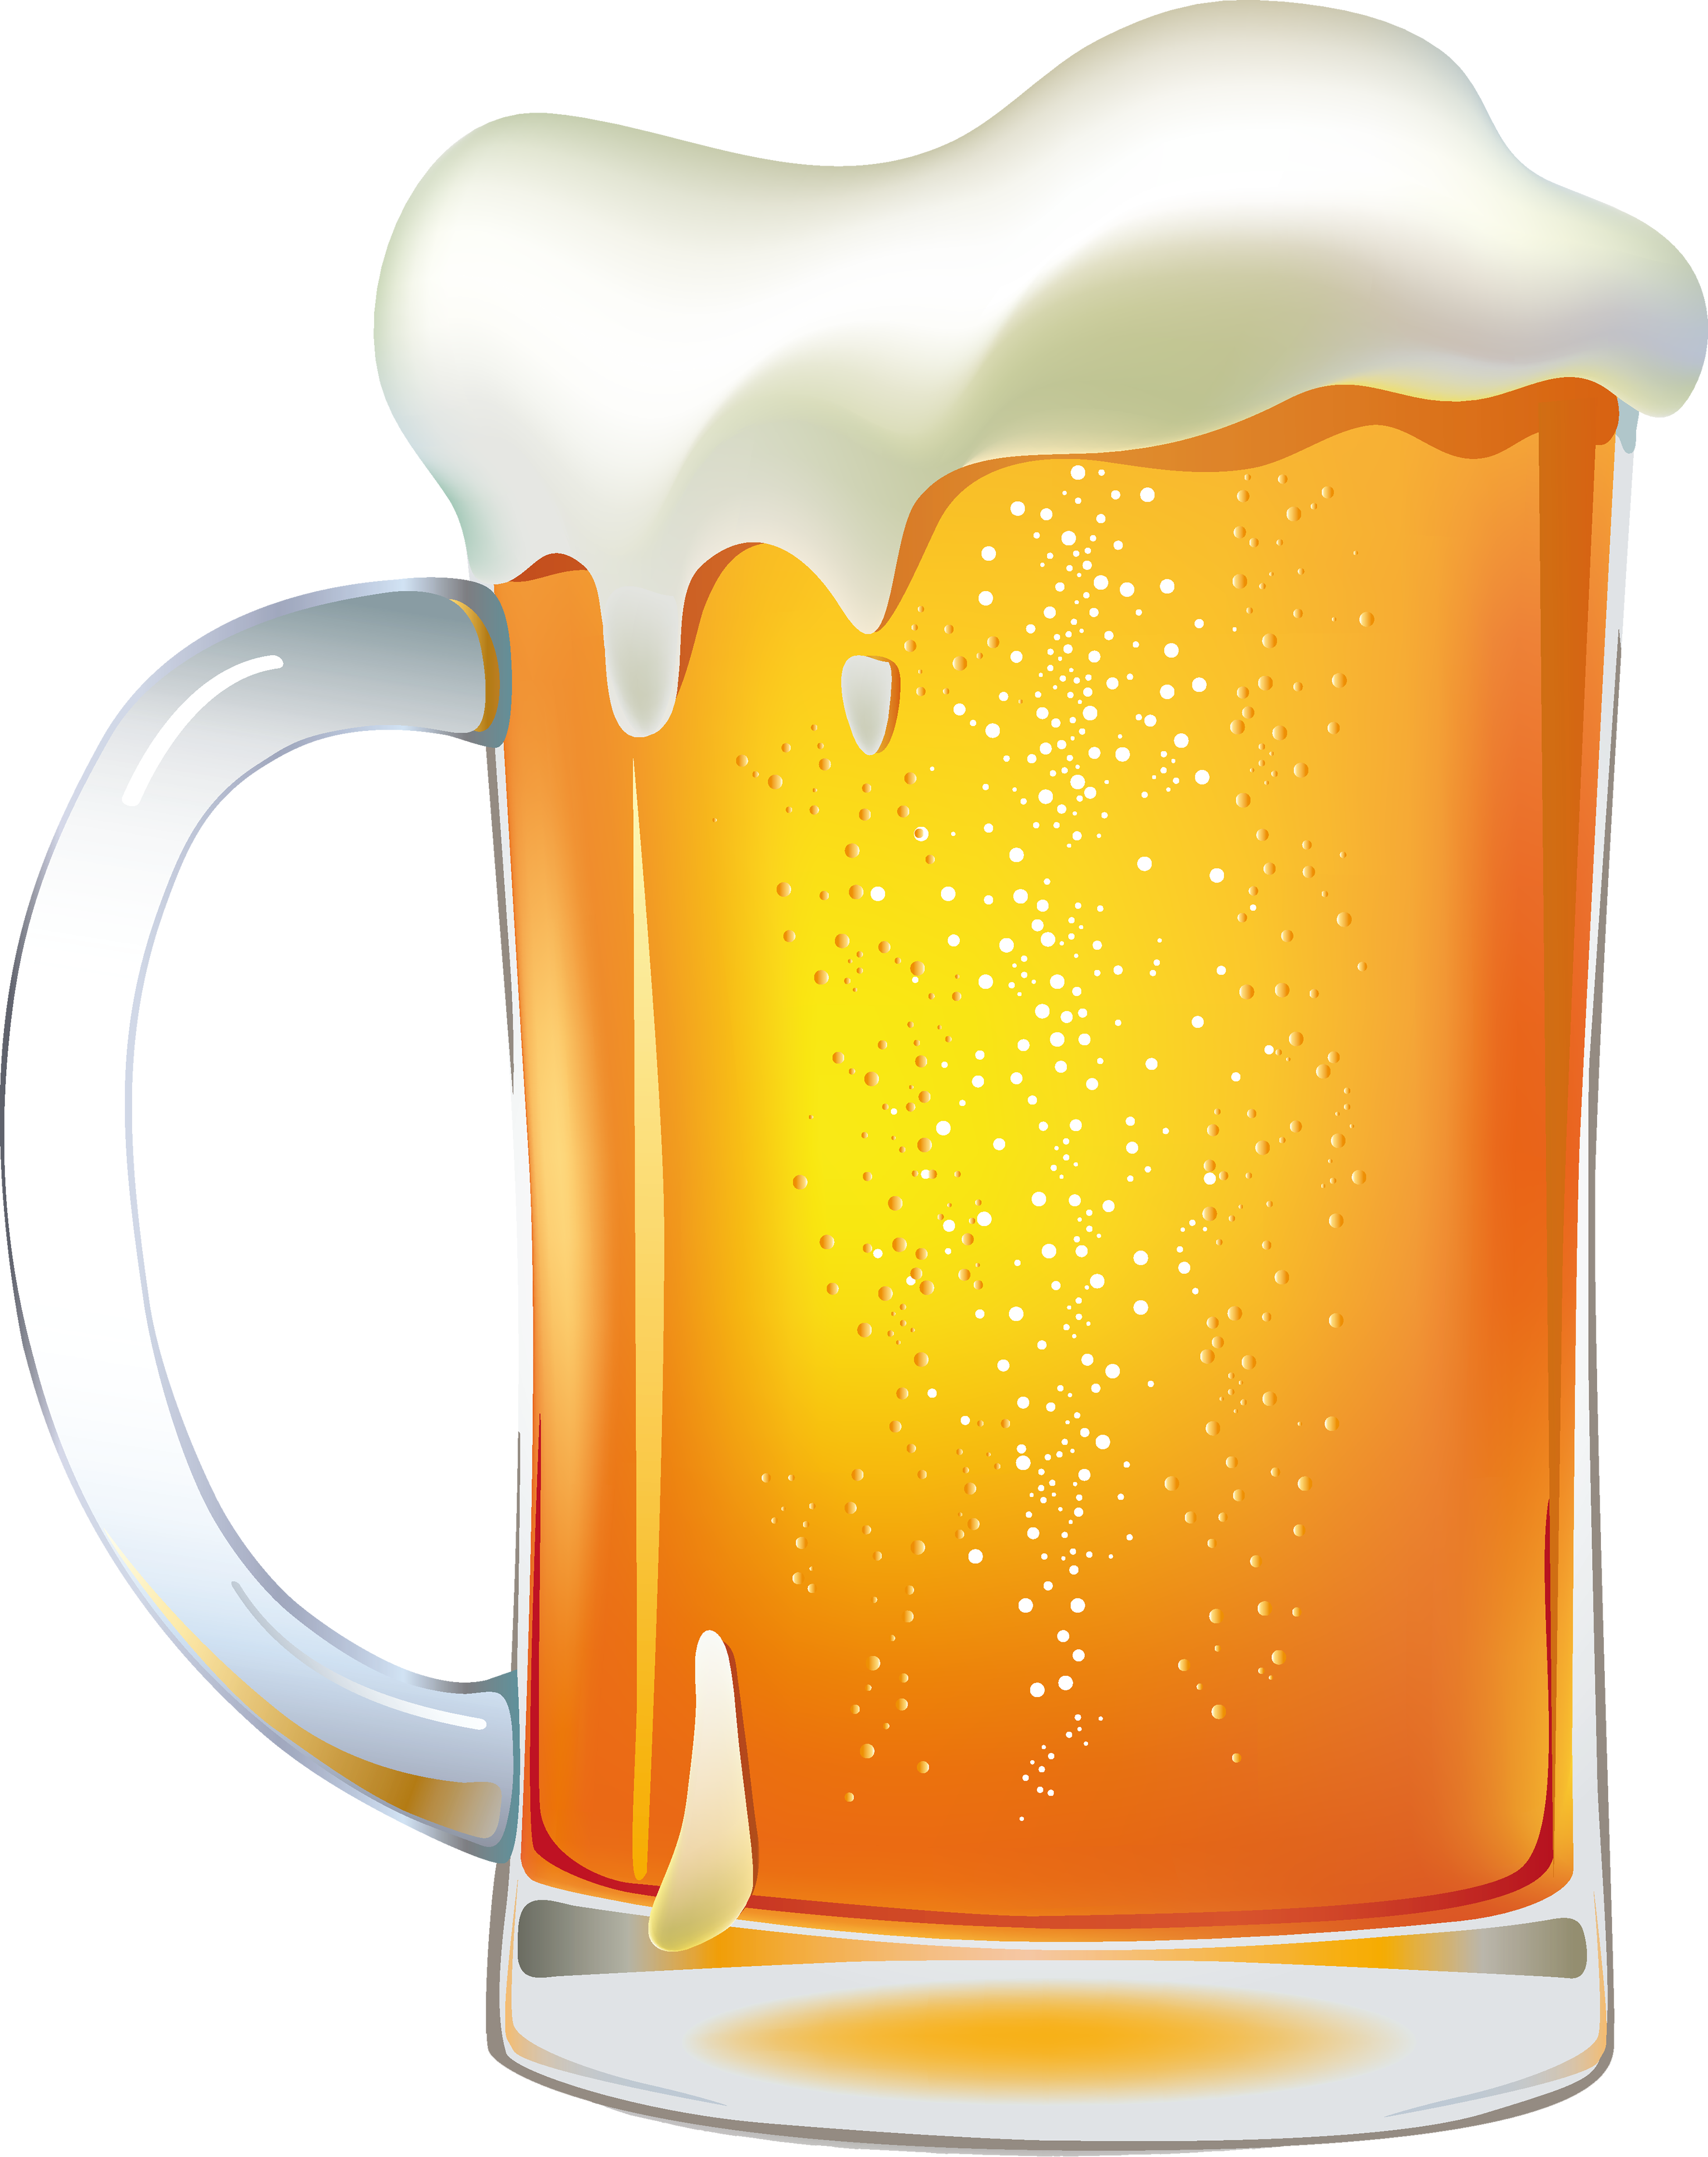 beer glass clipart free - photo #46